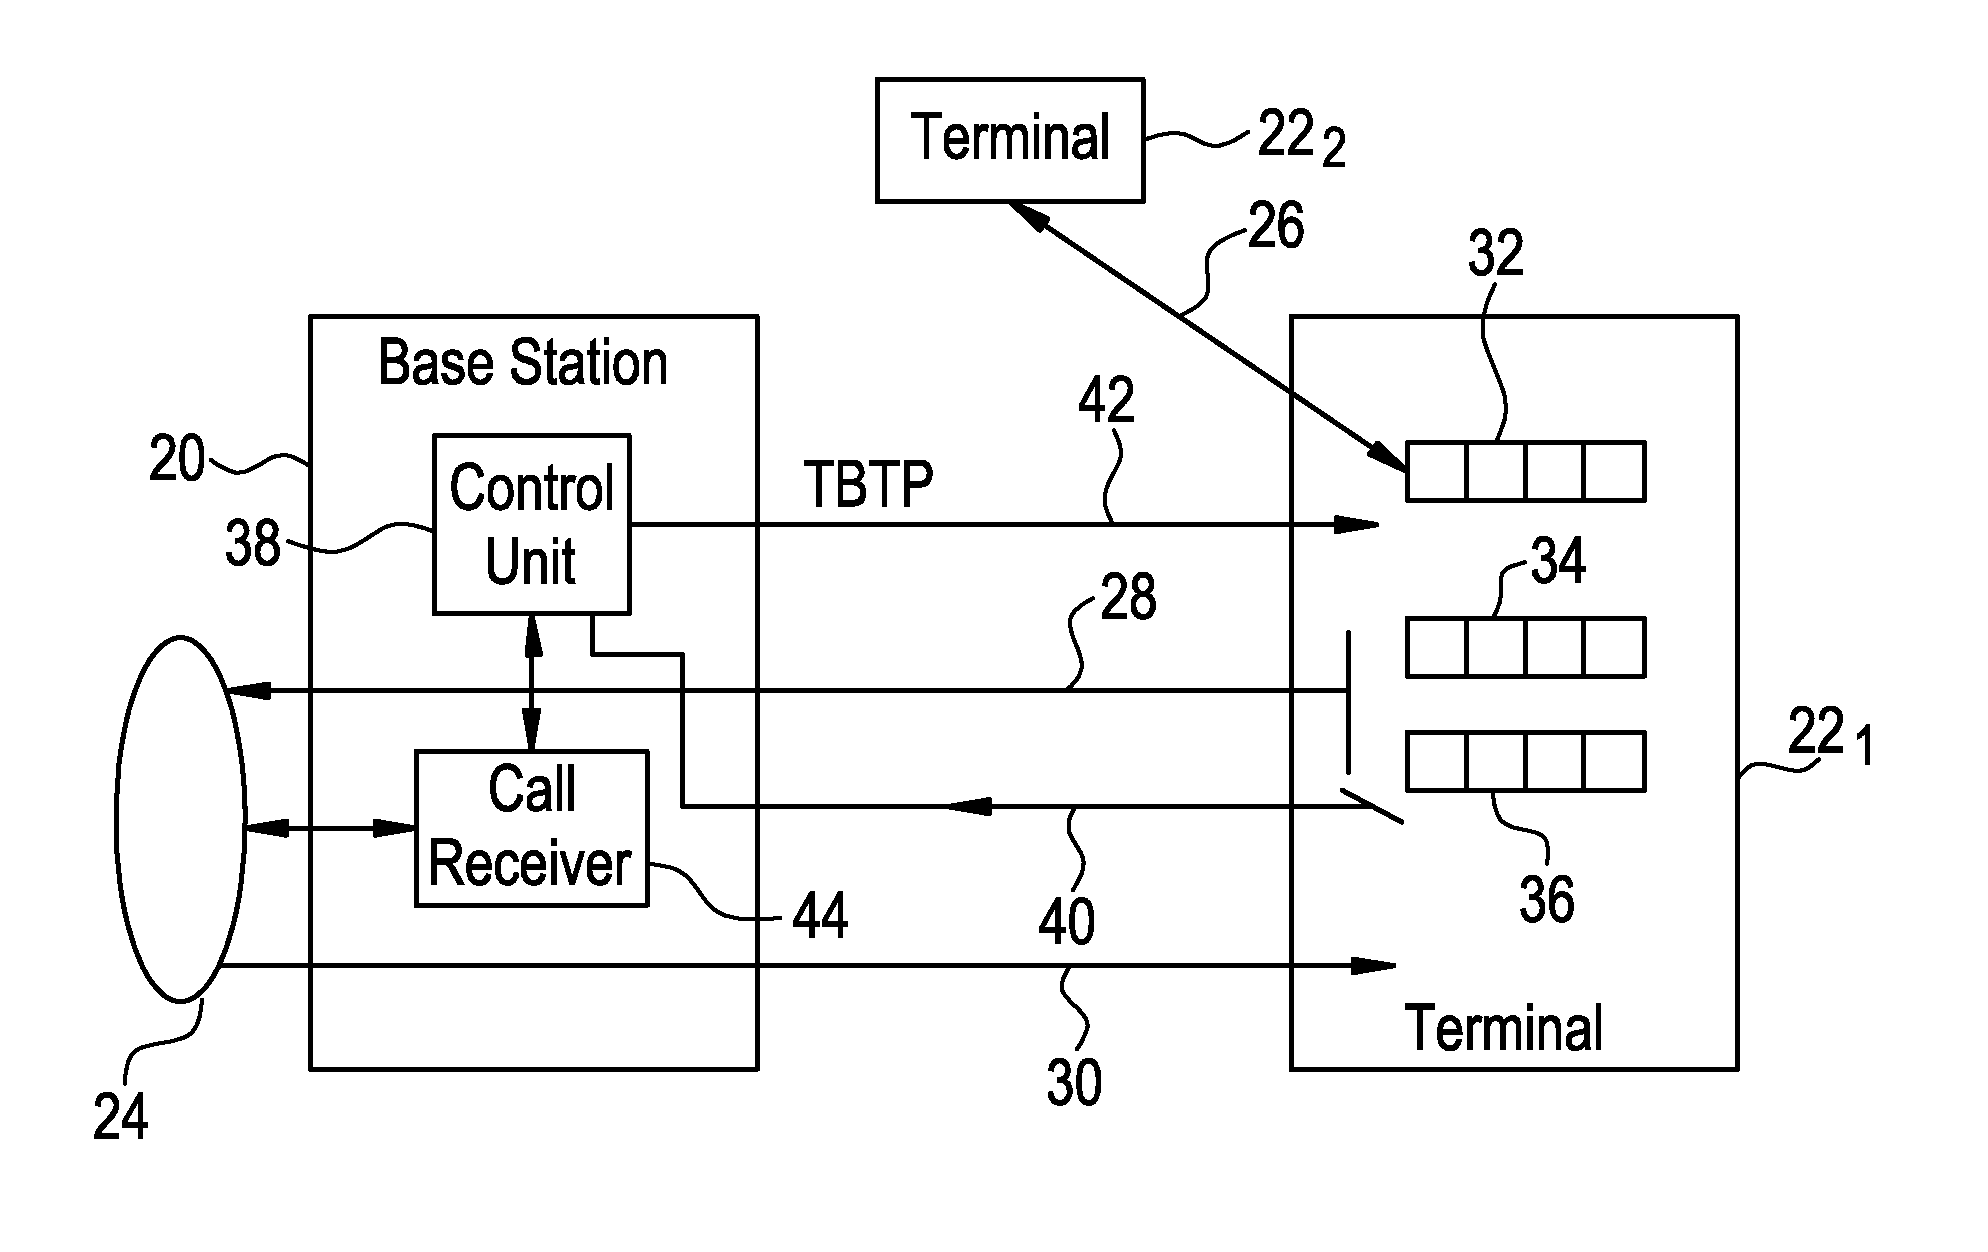 Method of allocating communication resources in an MF-TDMA telecommunication system